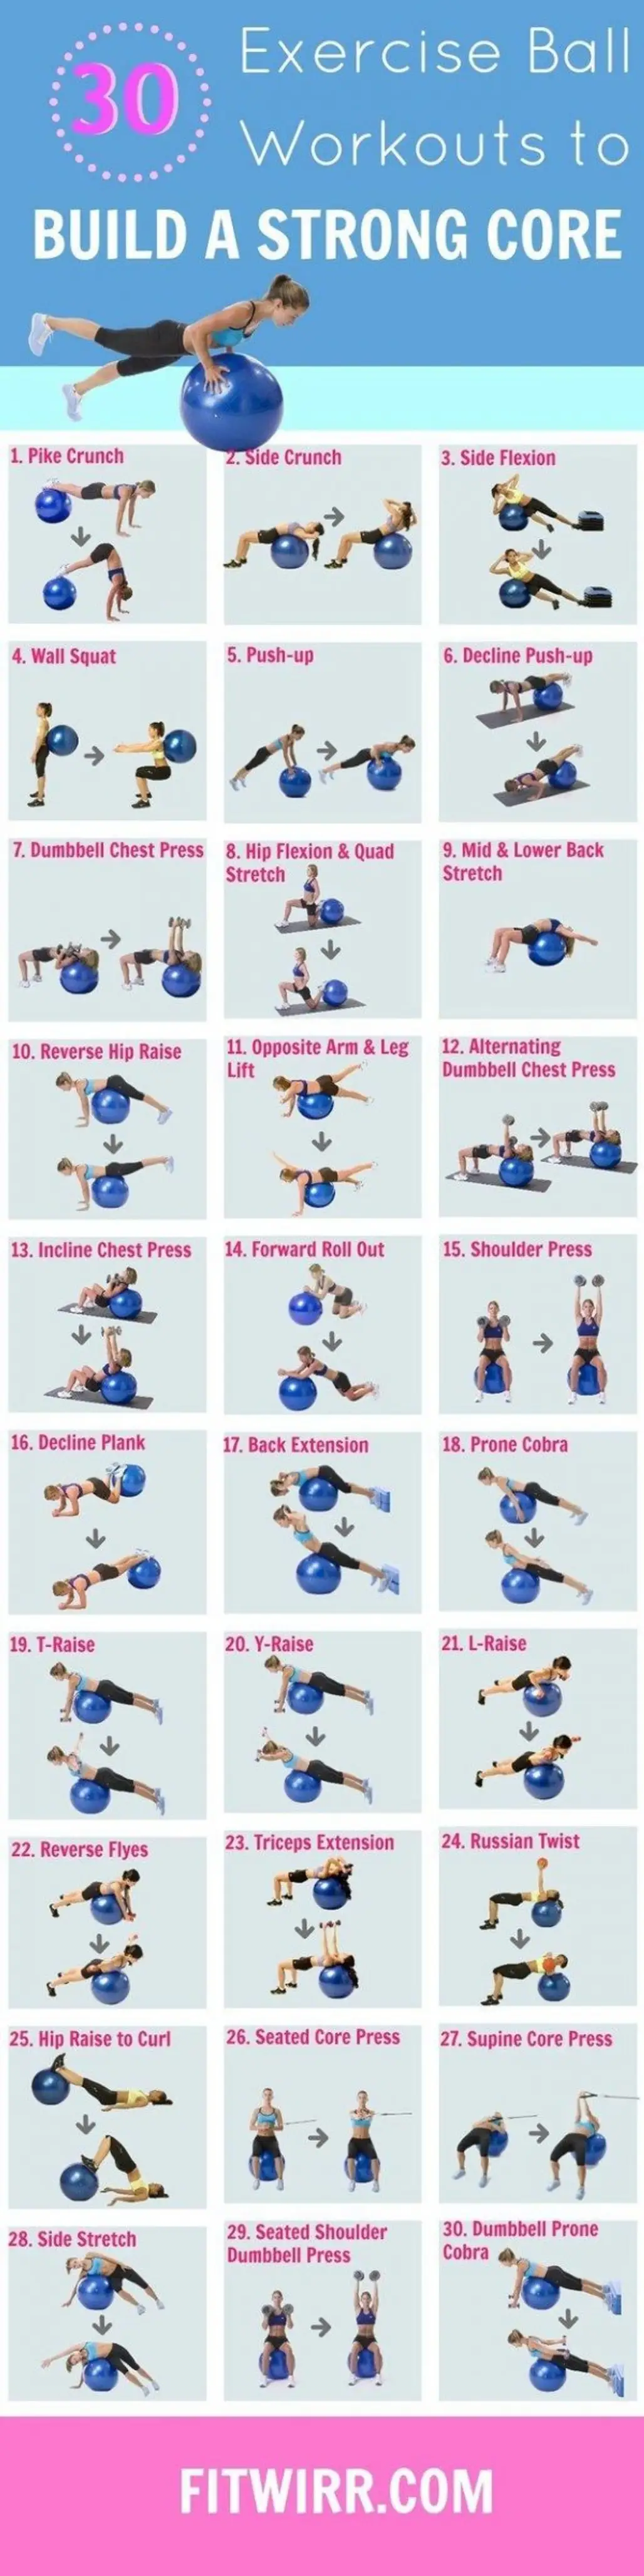 Exercise Ball for Your Core